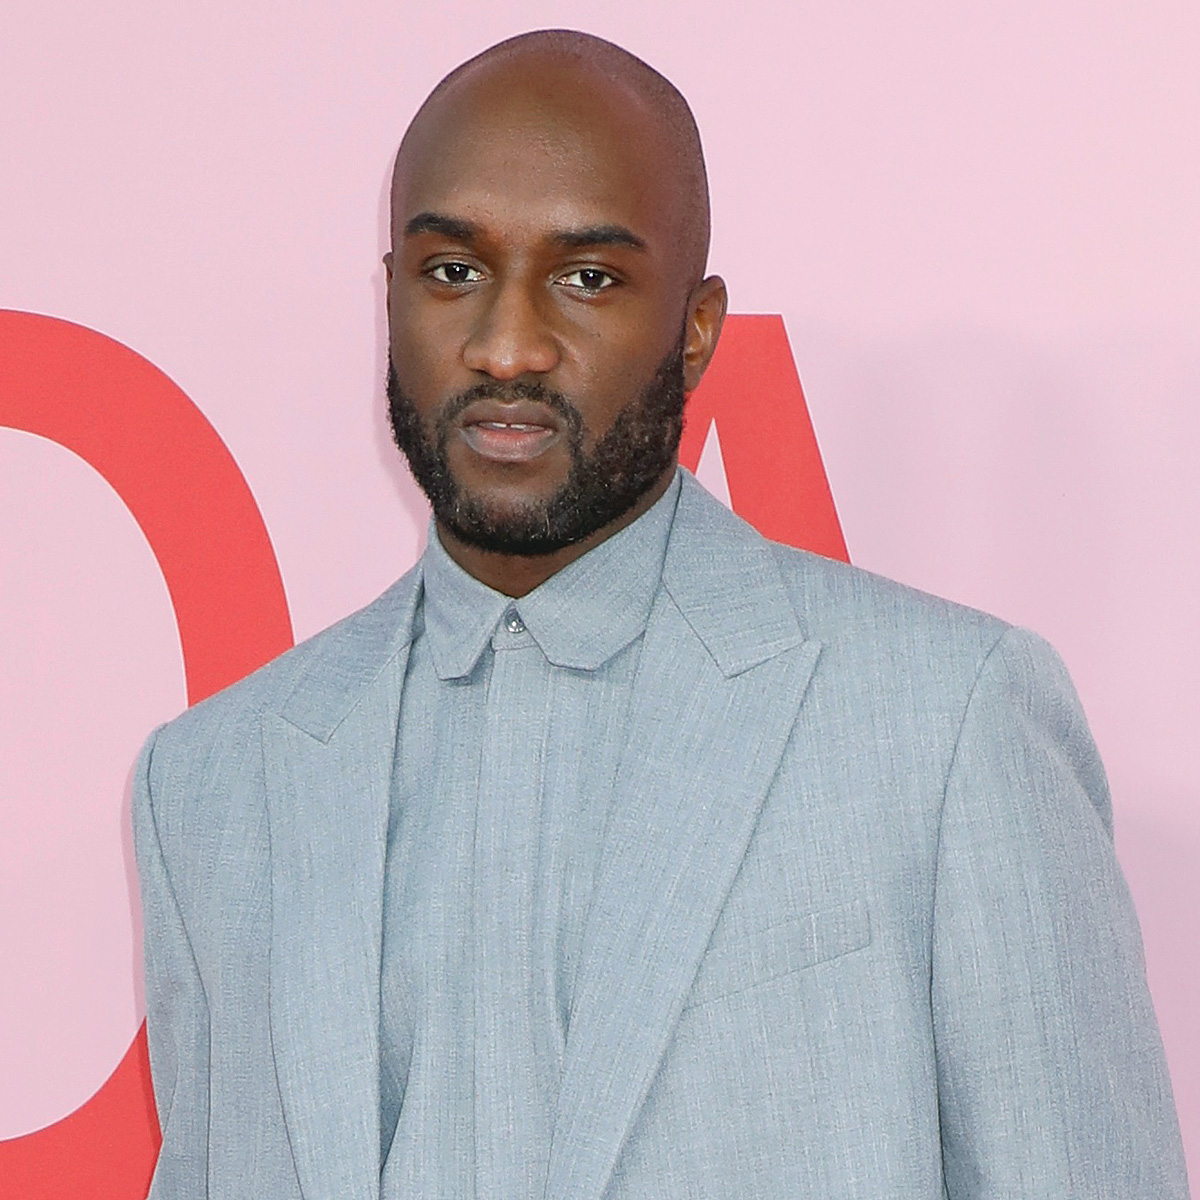 Industry mourns loss of 'visionary genius' Virgil Abloh